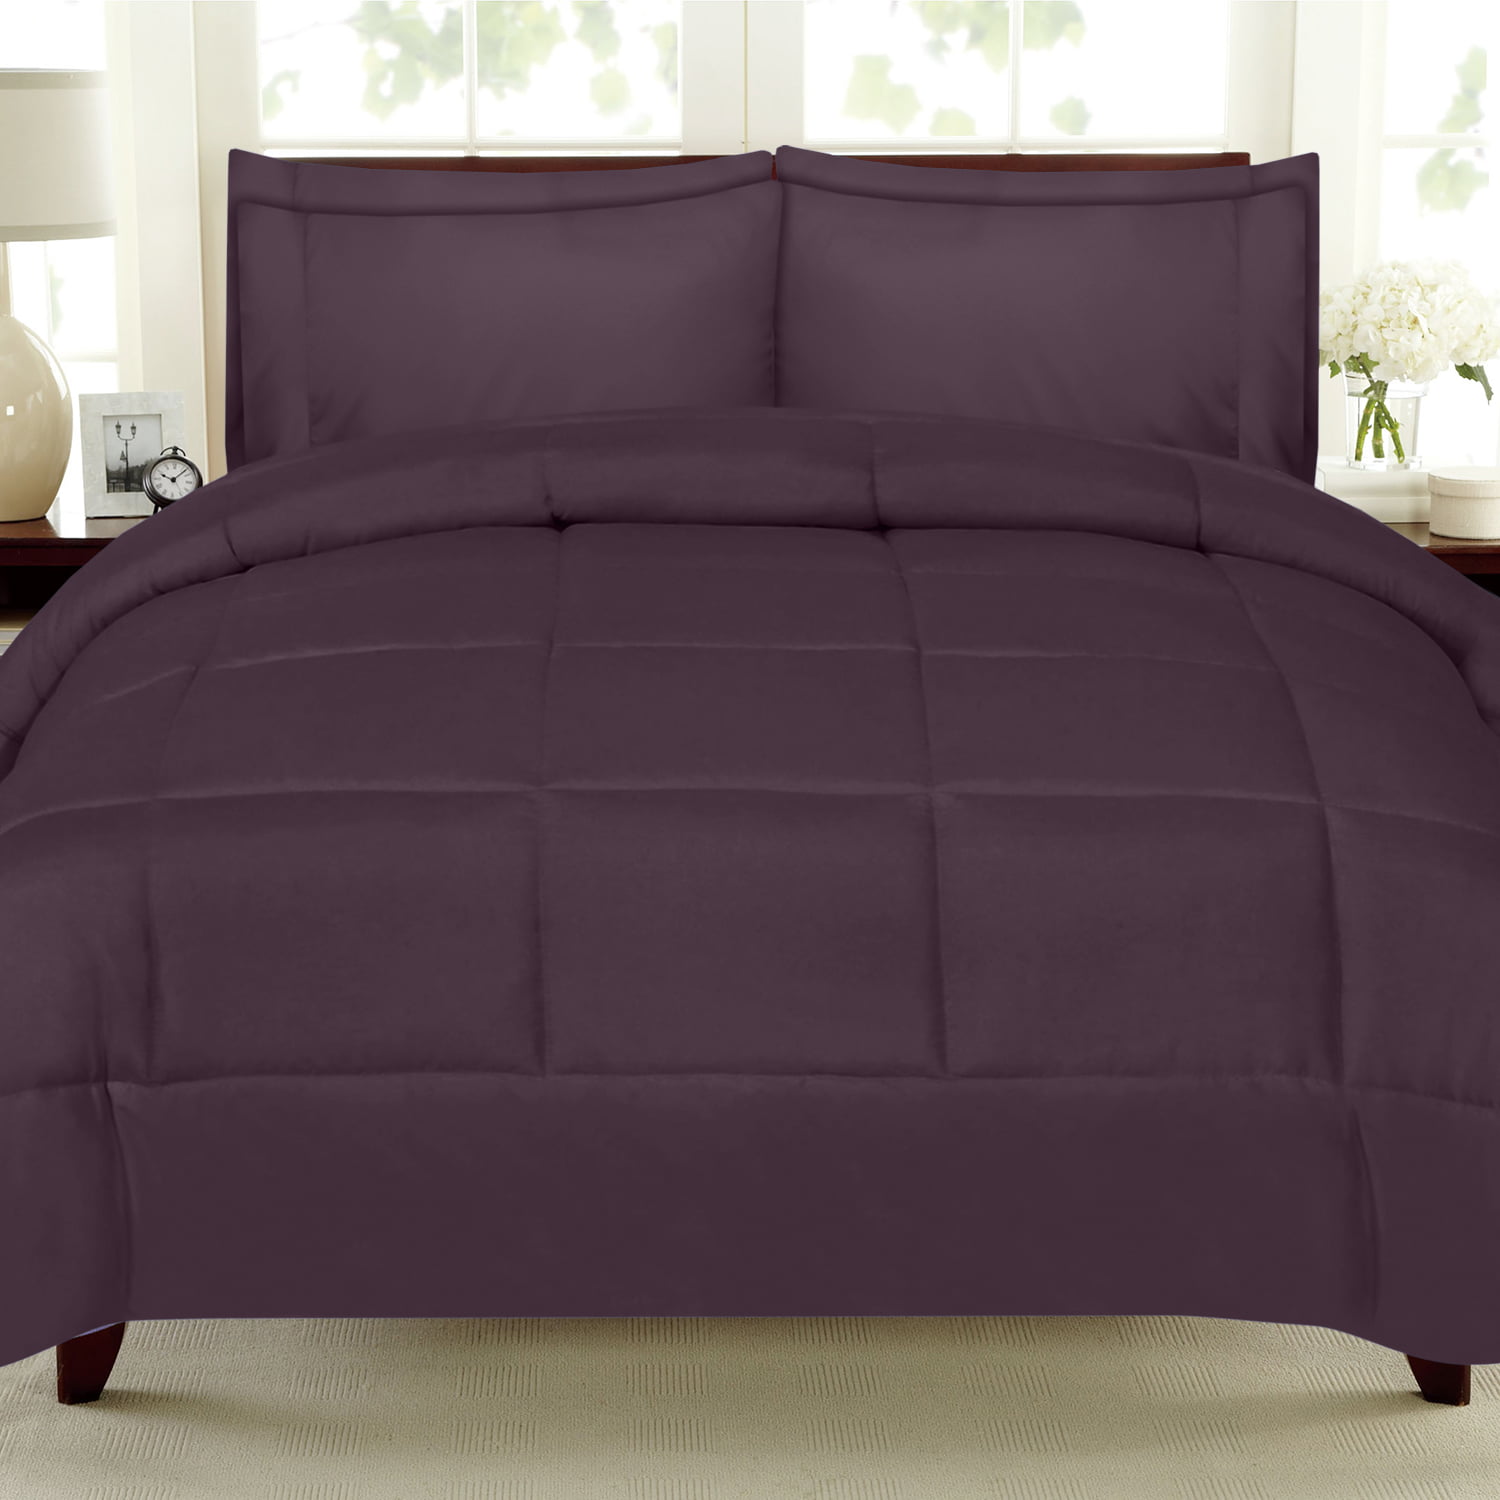 Luxury 7 Piece Bed-In-A-Bag Down Alternative Comforter And Sheet Set